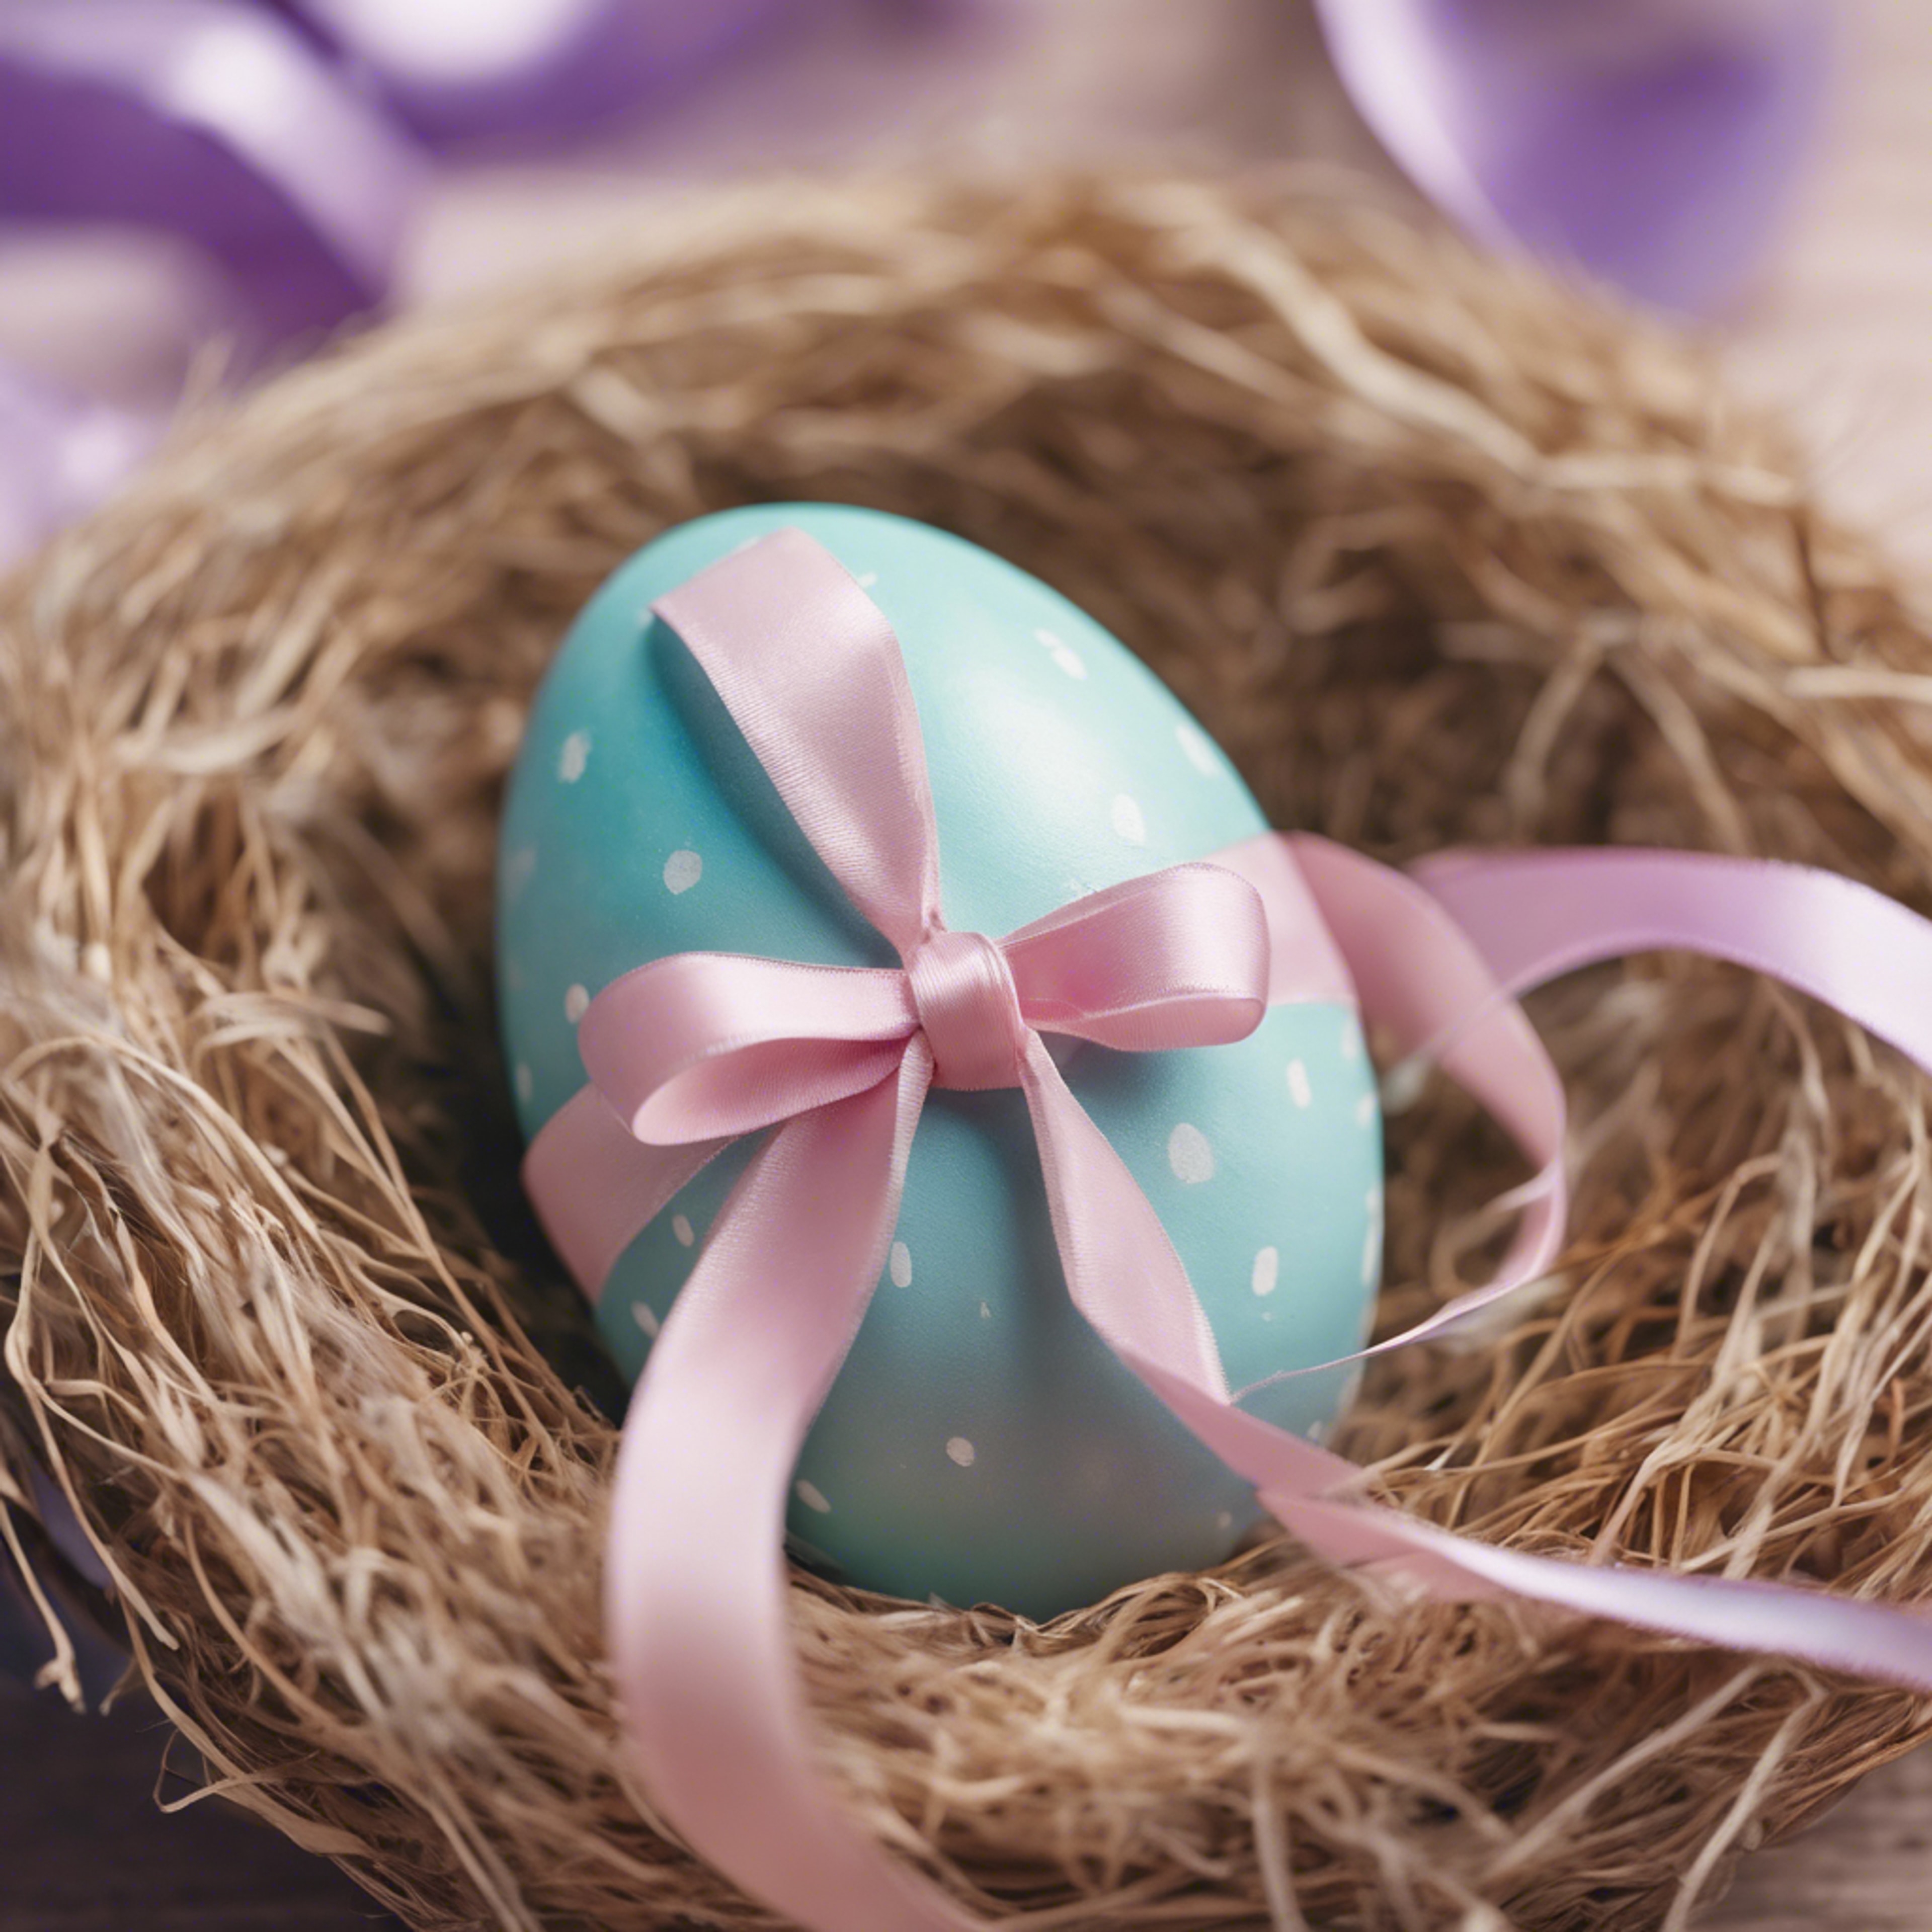 Close-up image of a pastel-colored Easter egg with ribbon details, on a nest. 벽지[582f95aee8b94a49b4e5]